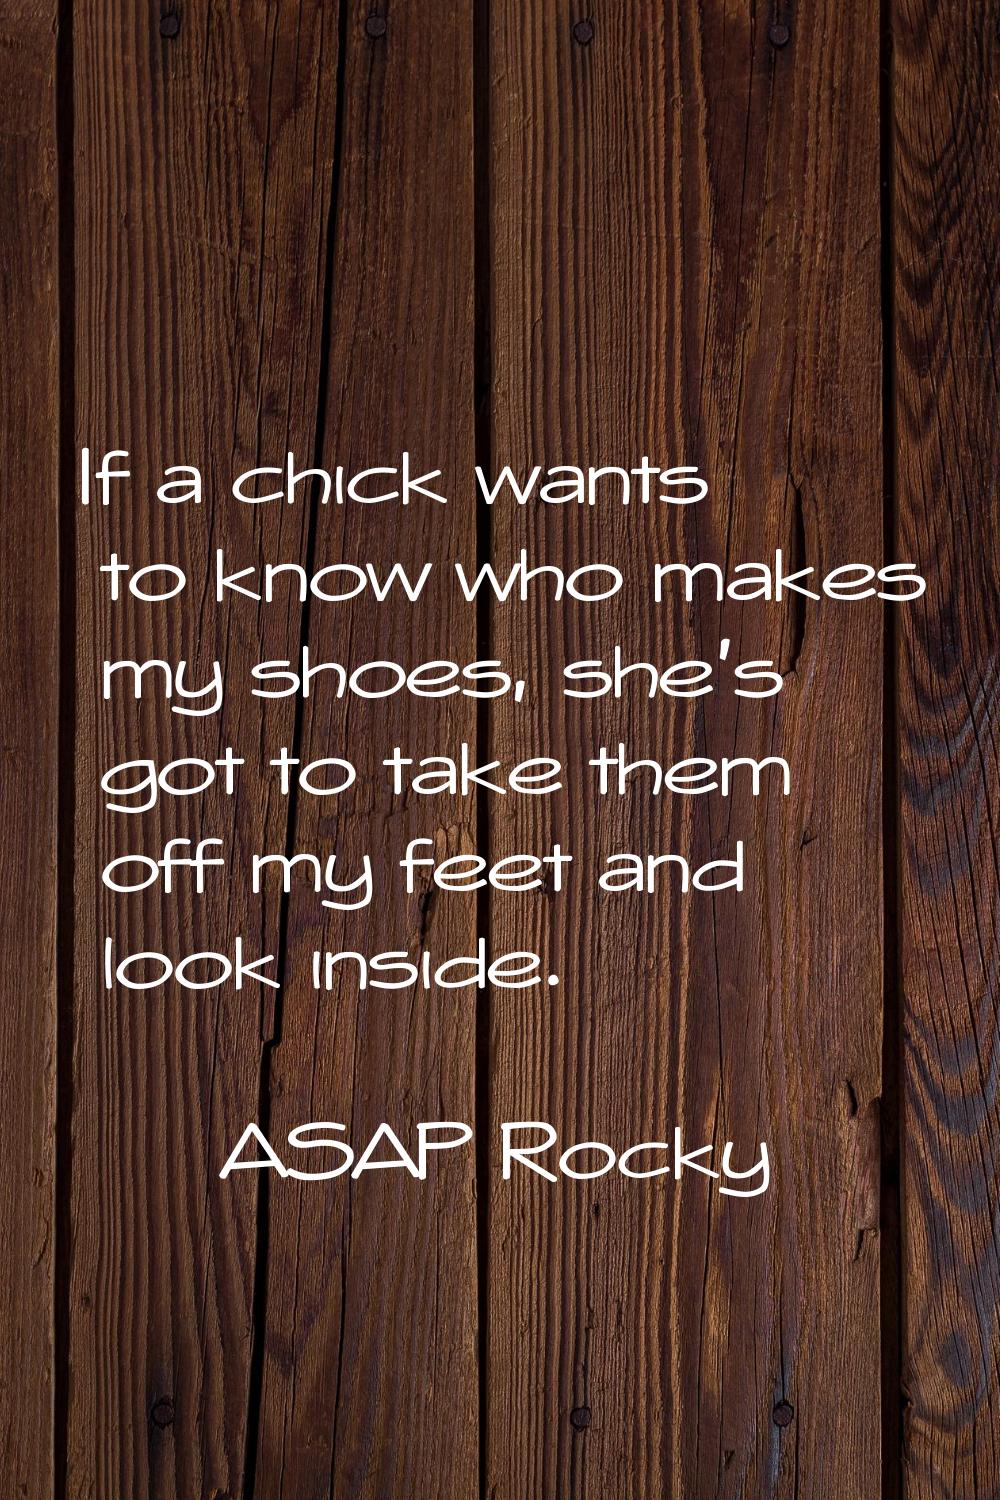 If a chick wants to know who makes my shoes, she's got to take them off my feet and look inside.